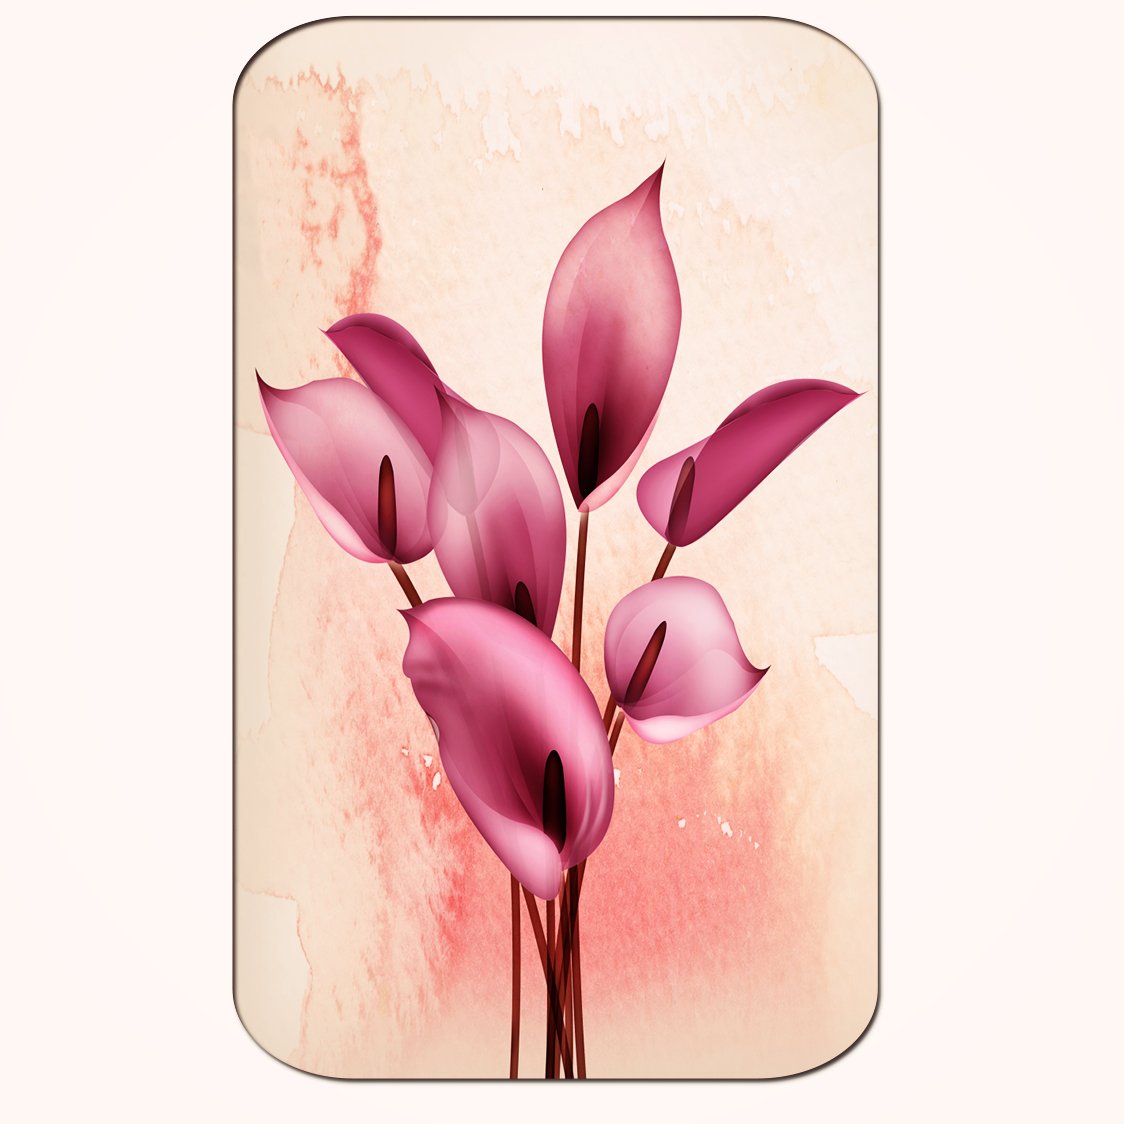 Casperme Beautiful Flower Big Frame Wall Painting For Living Room & Office (18 x 36 inches)